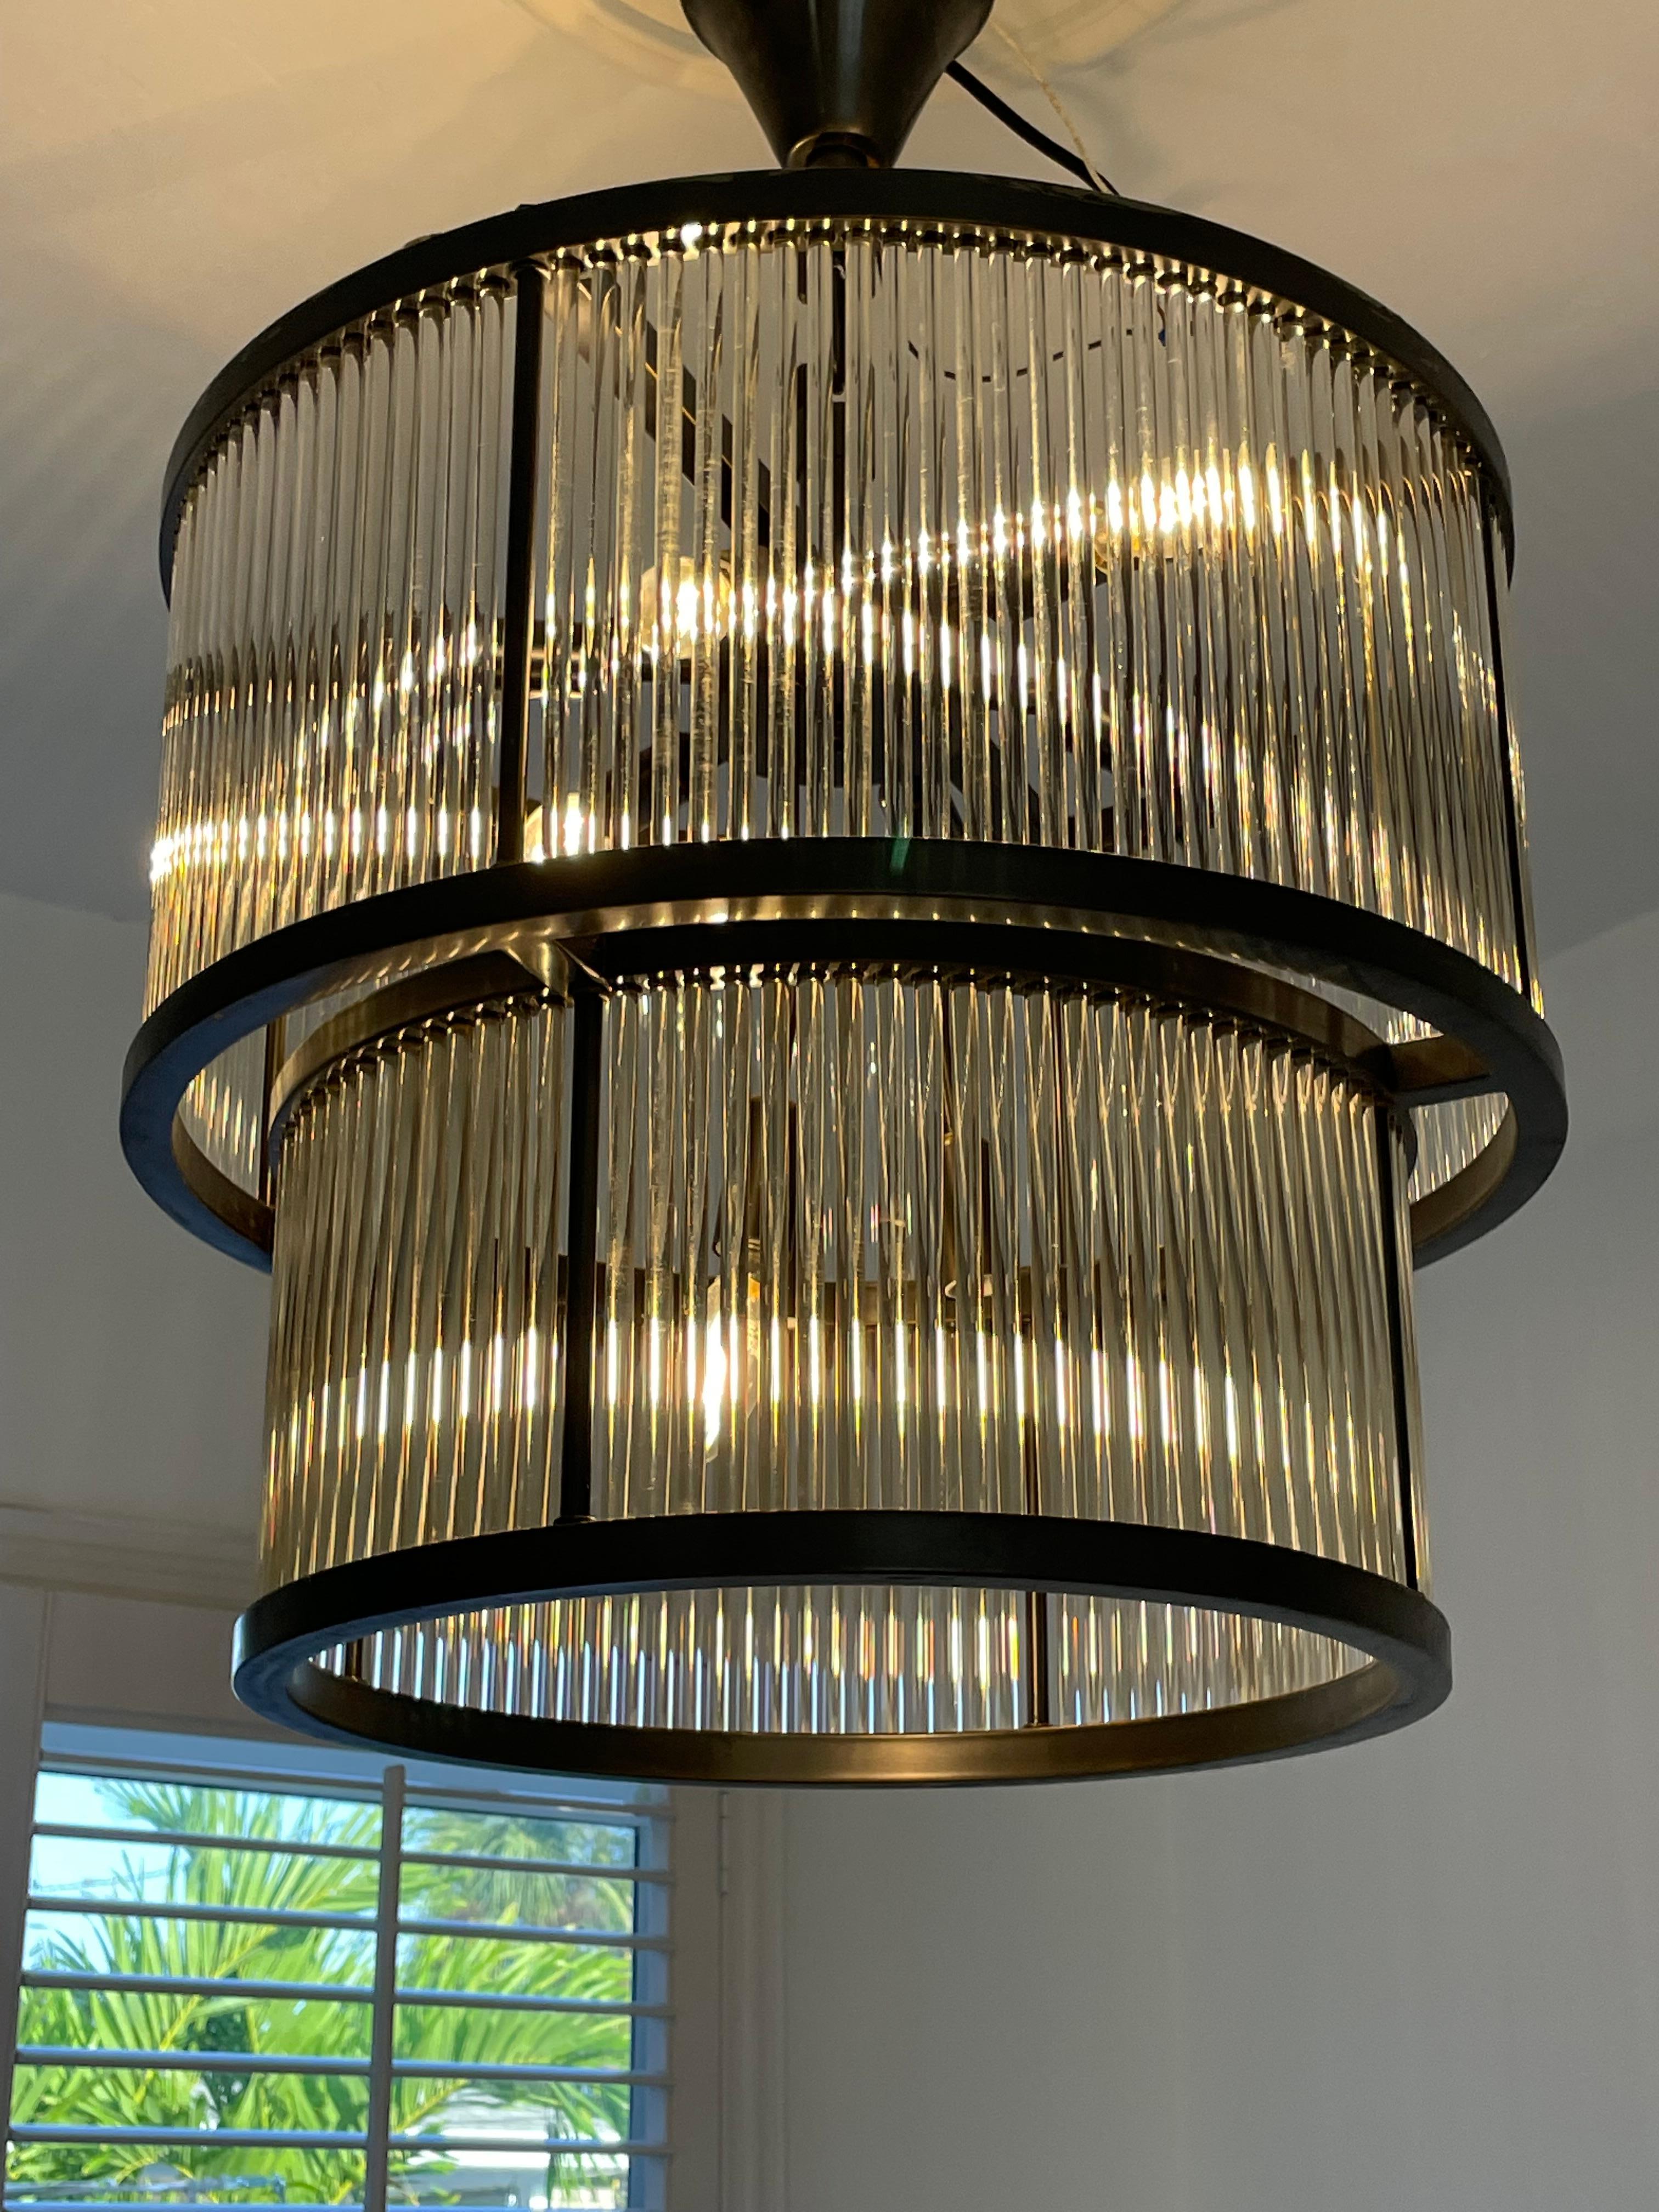 Circular metal chandelier composed of two floors of glass tubes, the light diffuses from the bottom as all around the chandelier through the glass rods and gives a considerable effect to the diffusion of the light.